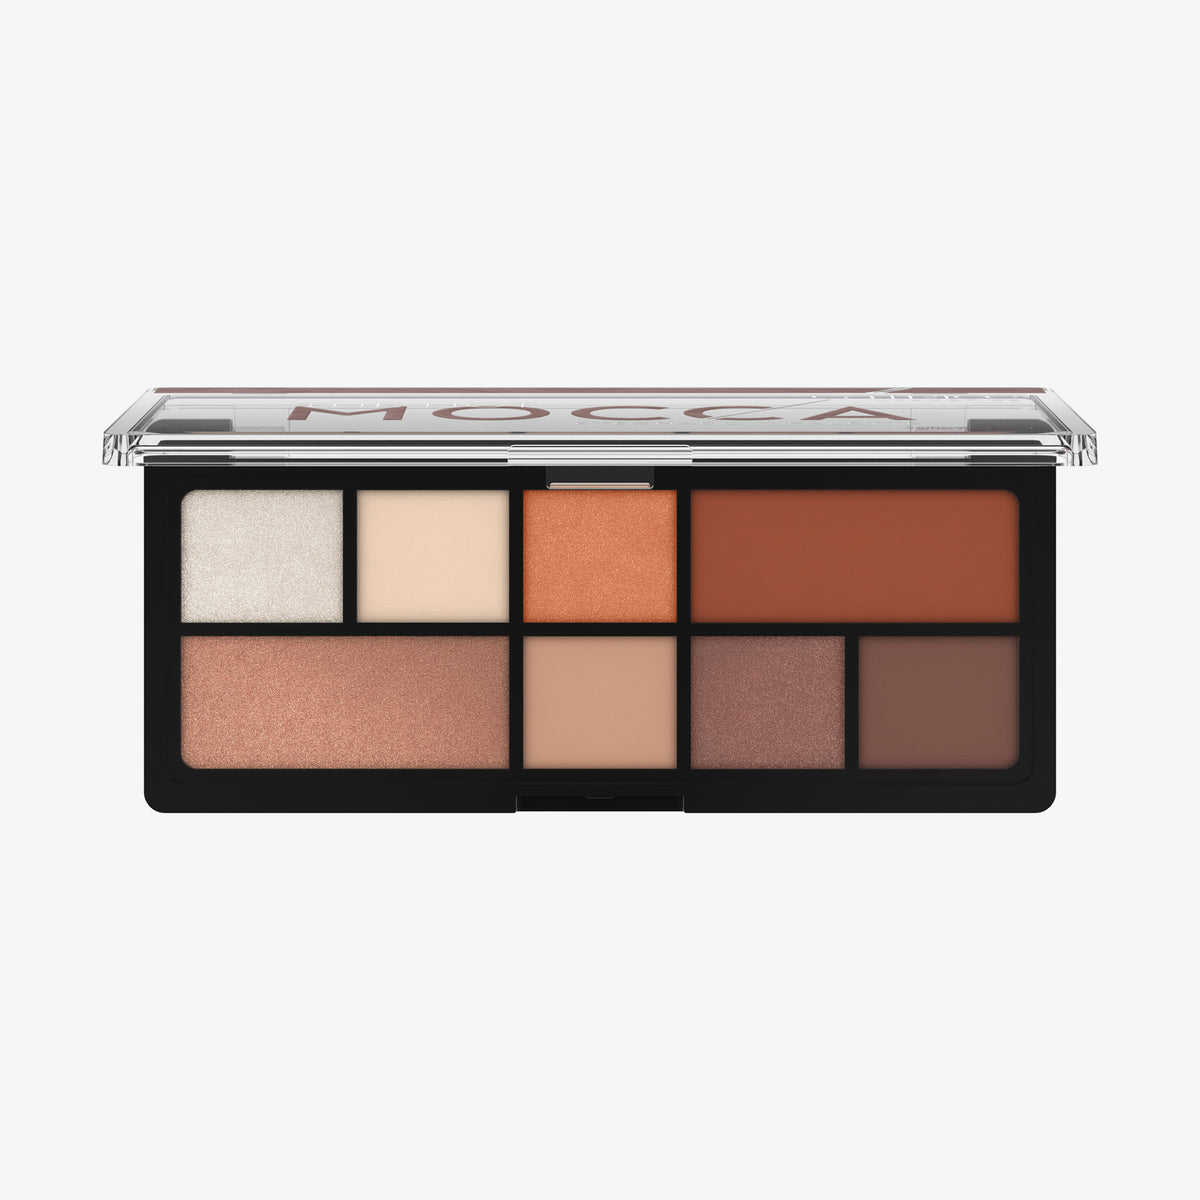 Catrice Cosmetics | The Hot Mocca Eyeshadow Palette